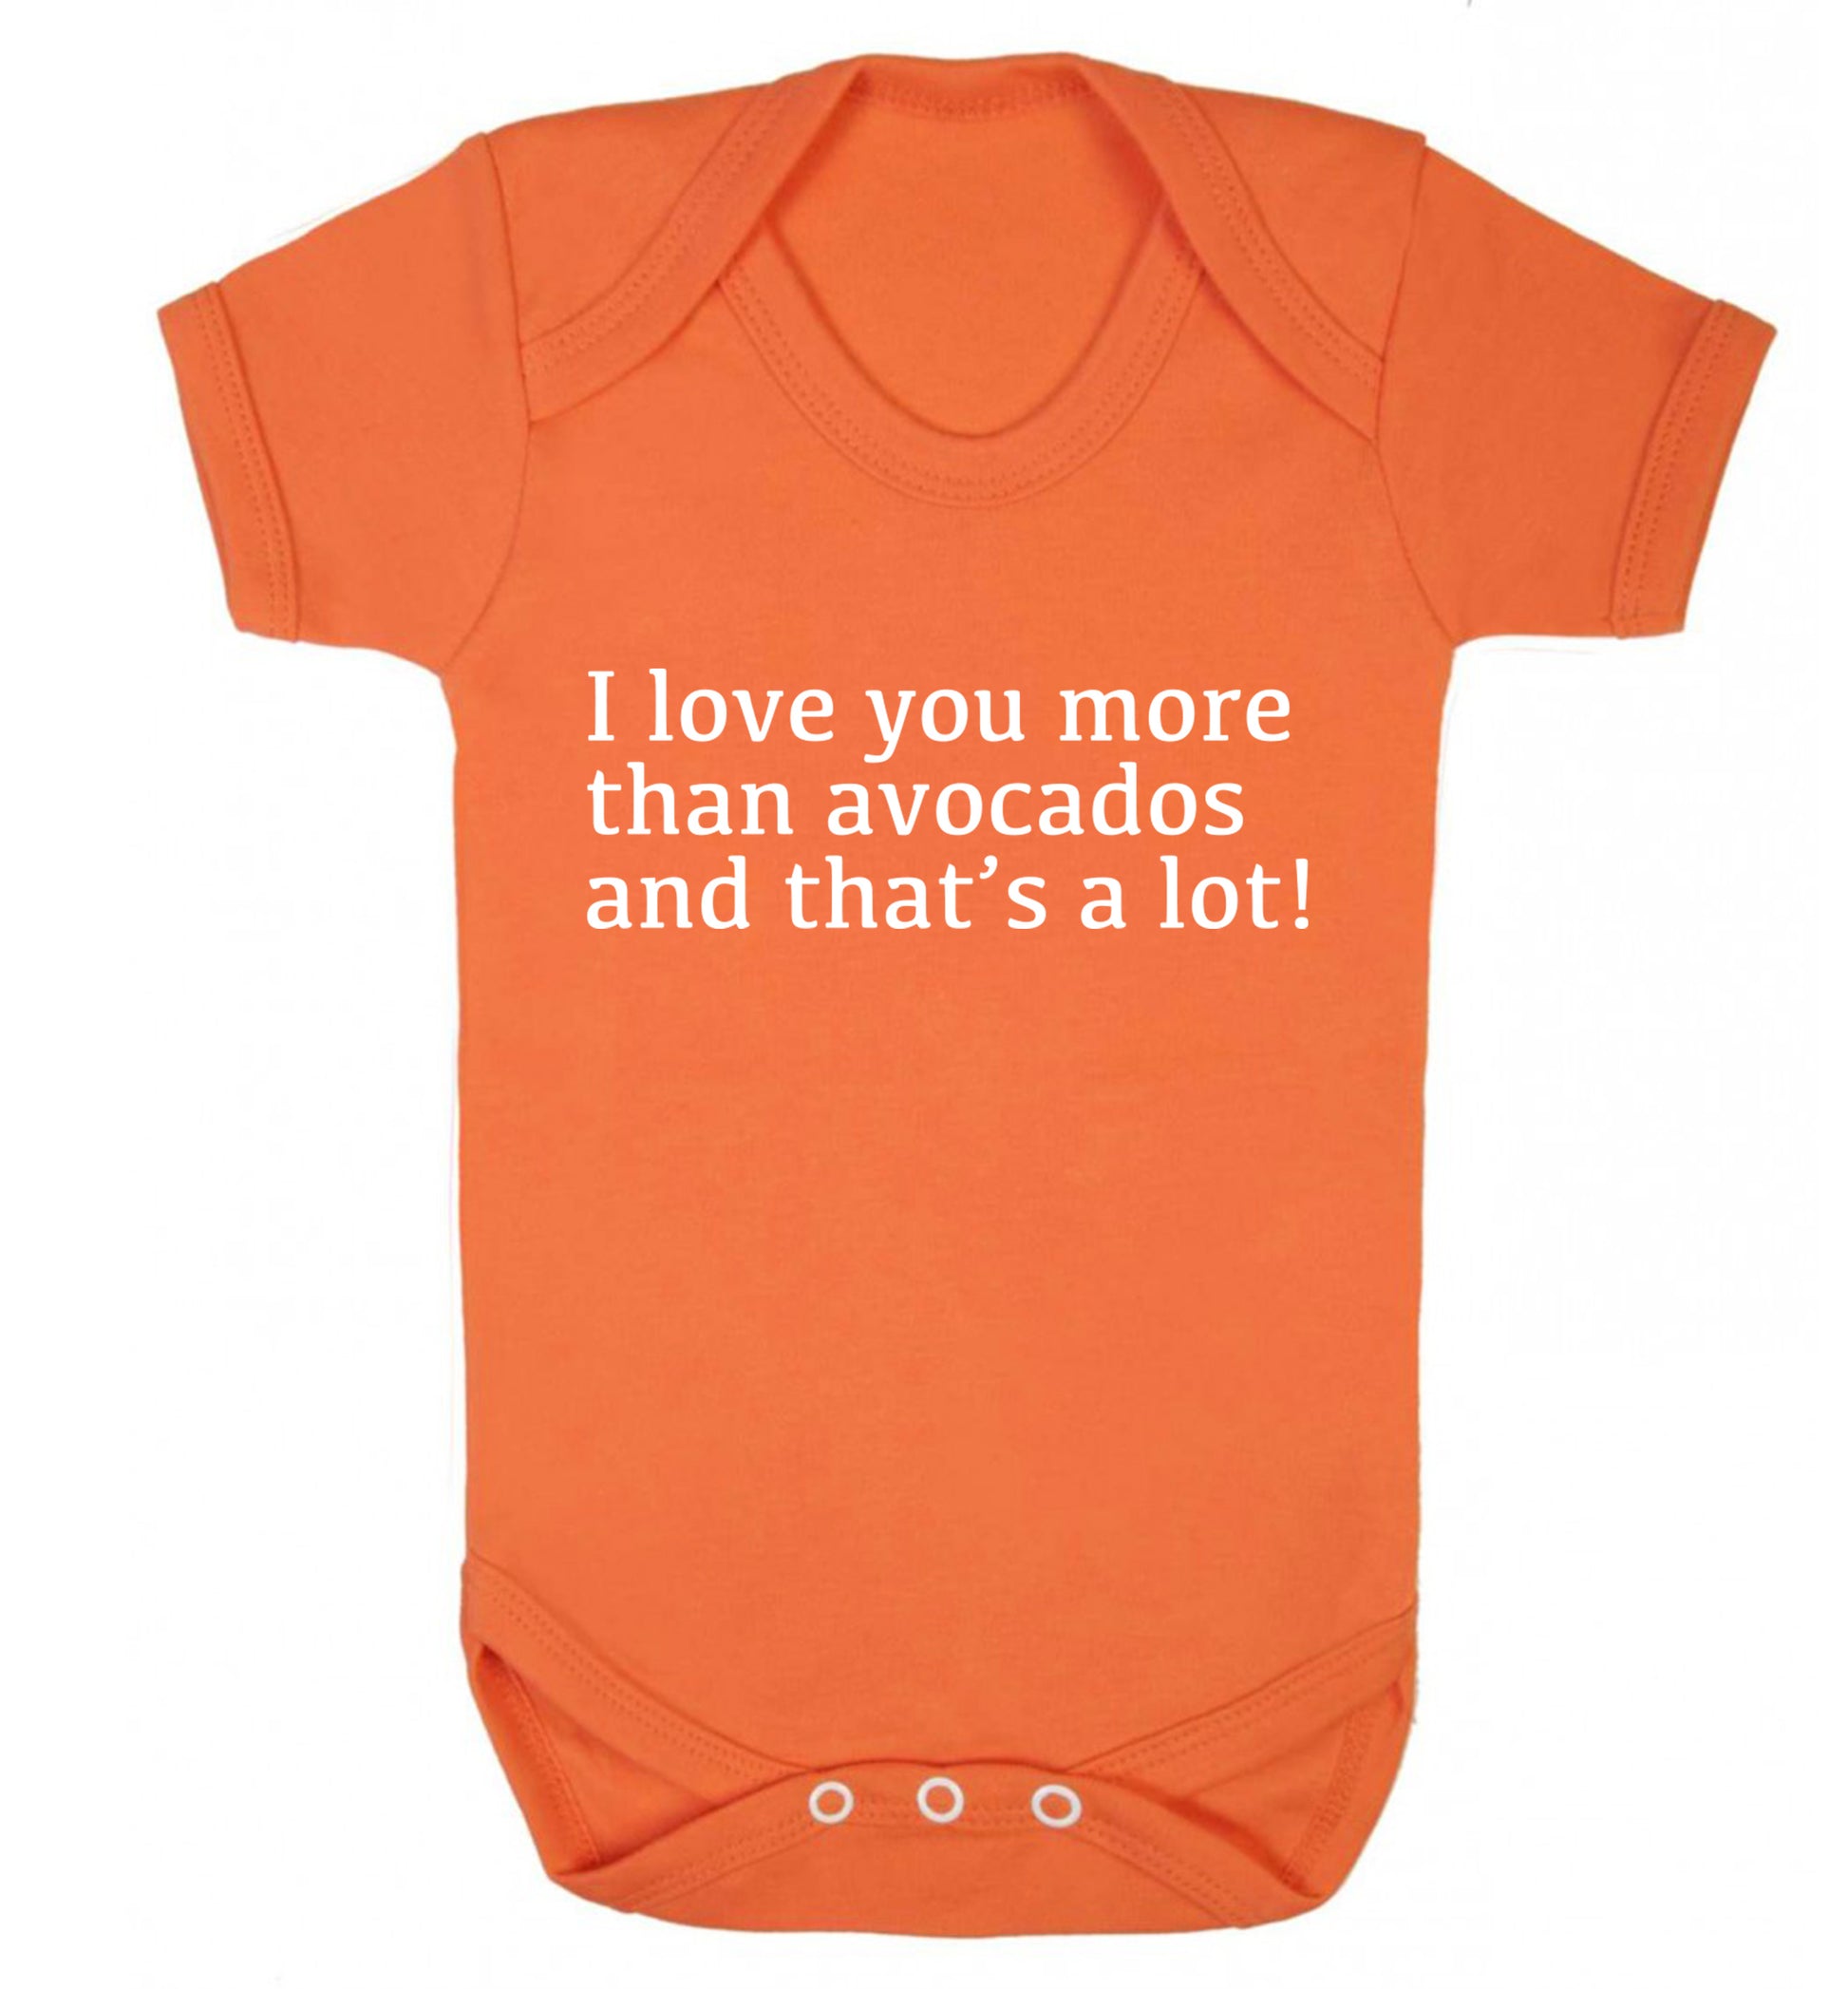 I love you more than avocados and that's a lot Baby Vest orange 18-24 months